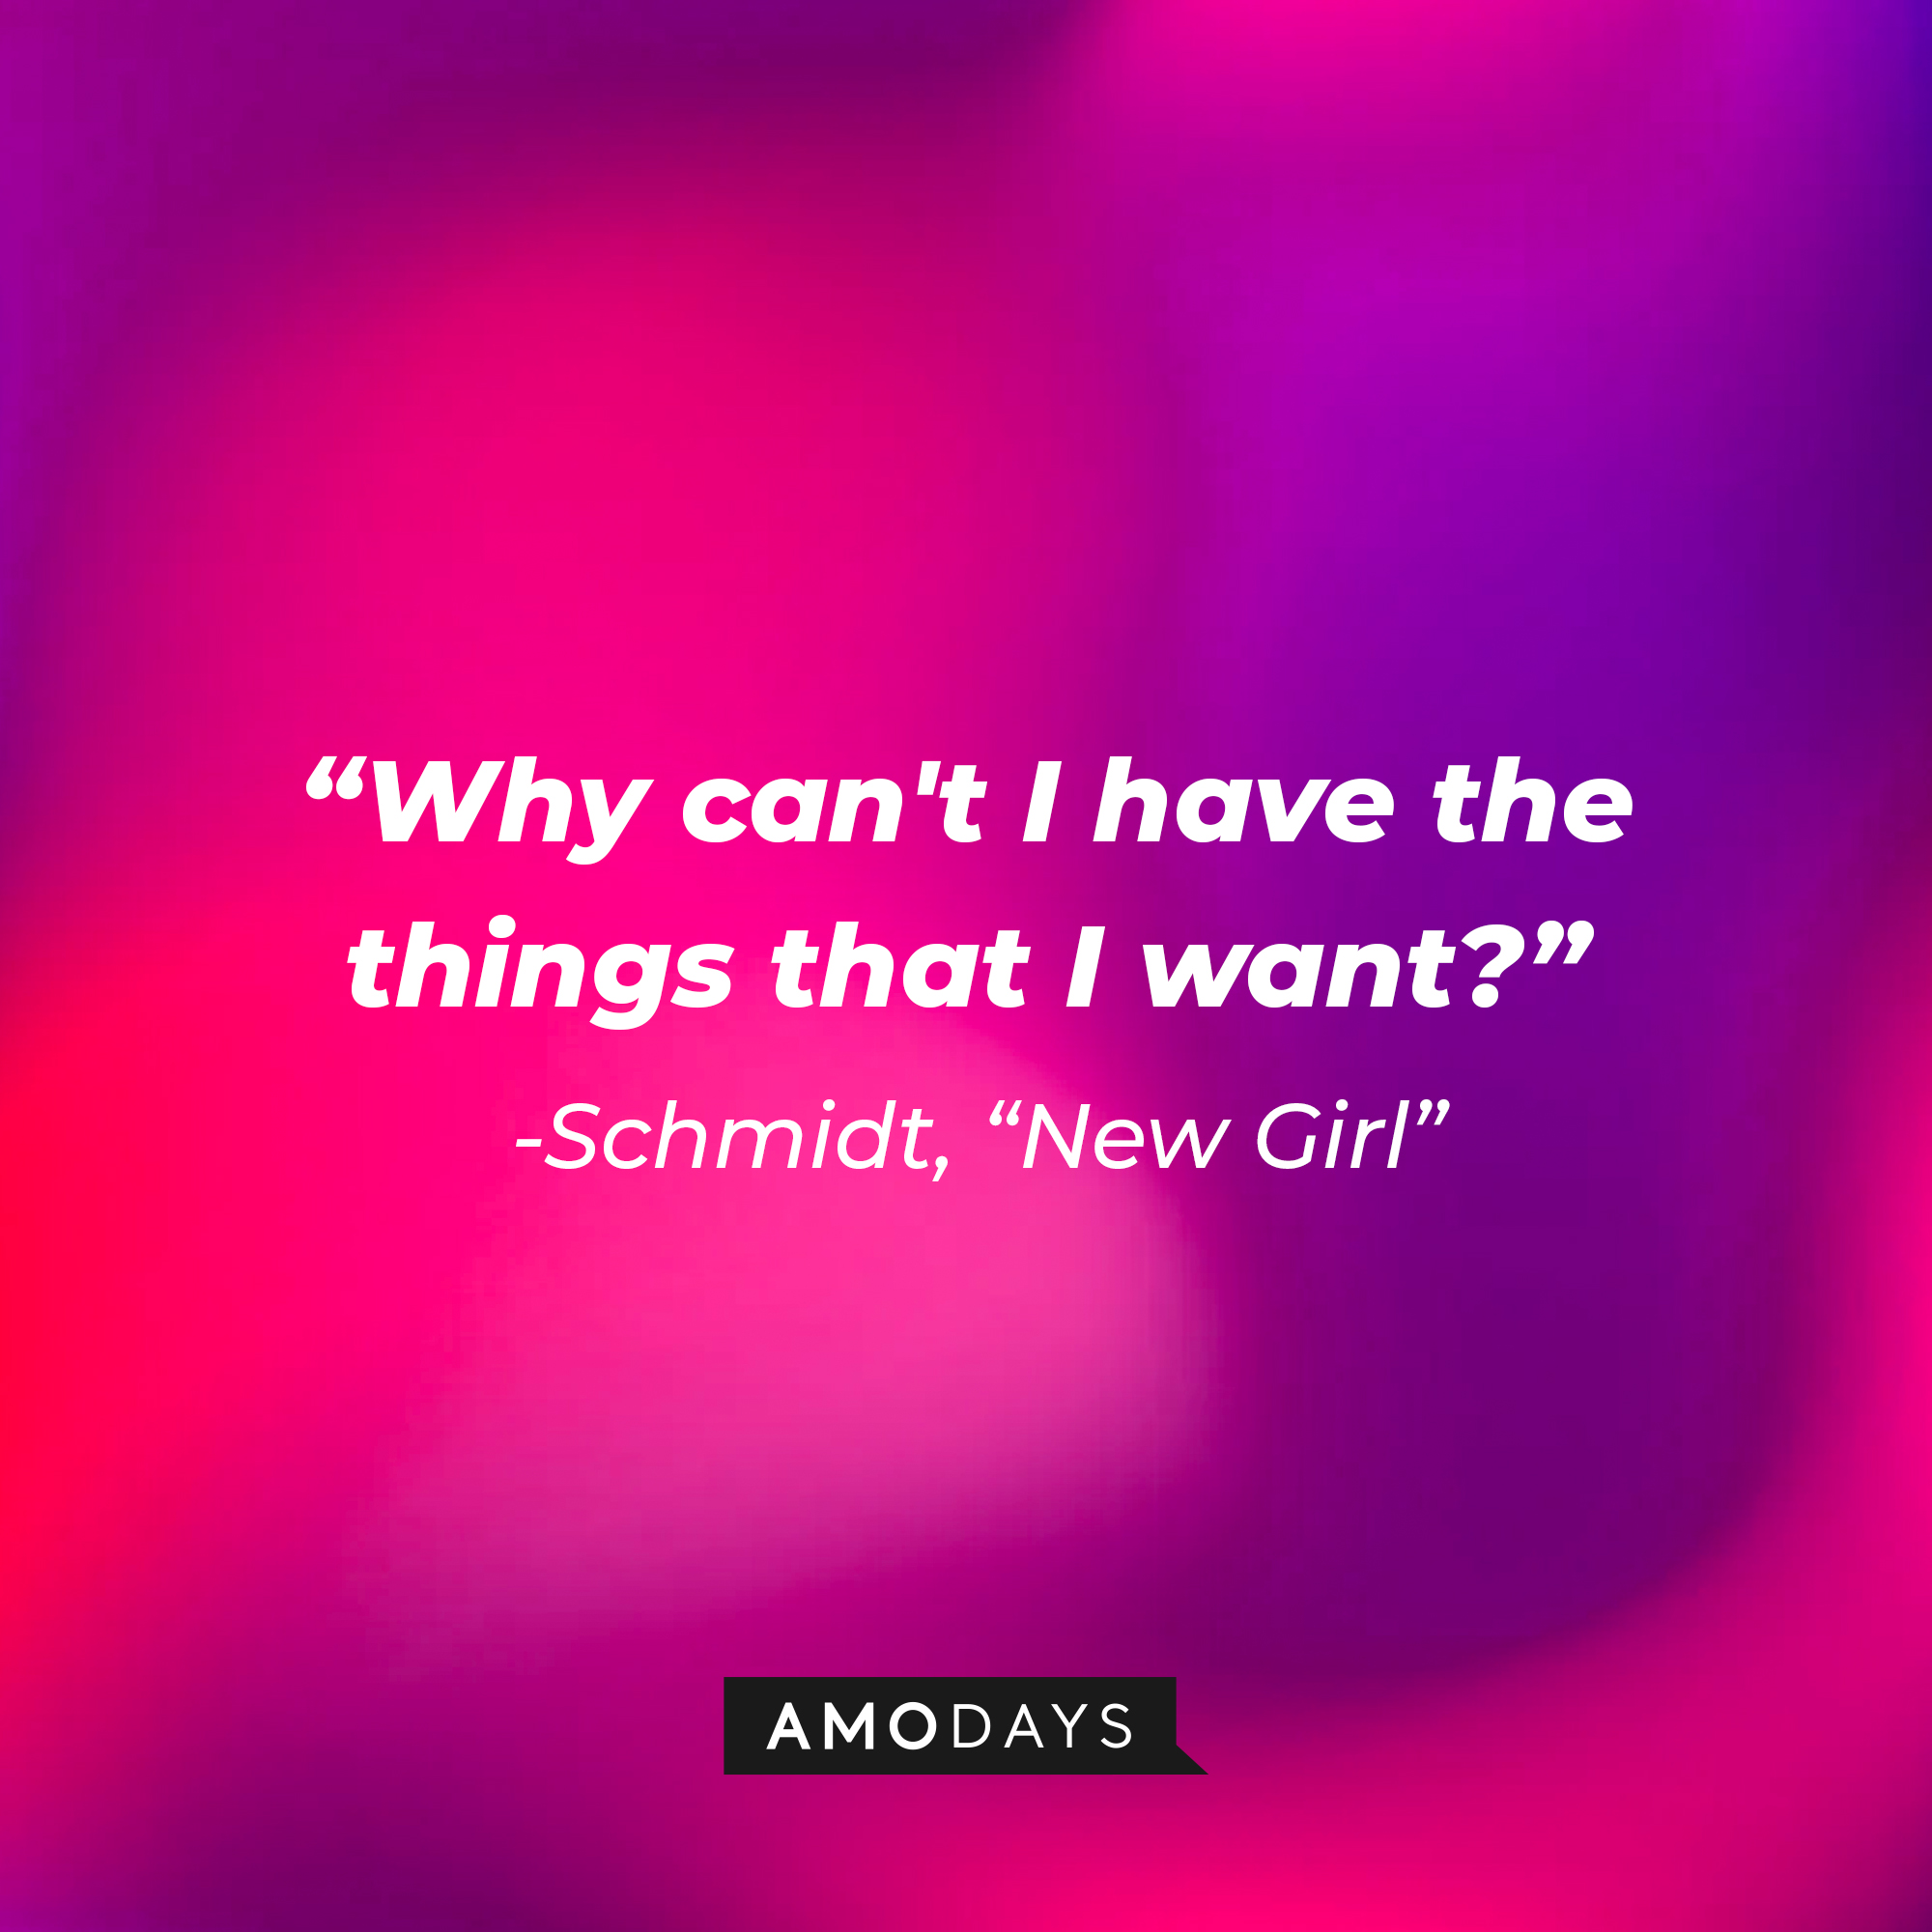 Schmidt's quote: "Why can't I have the things that I want?" | Source: Amodays